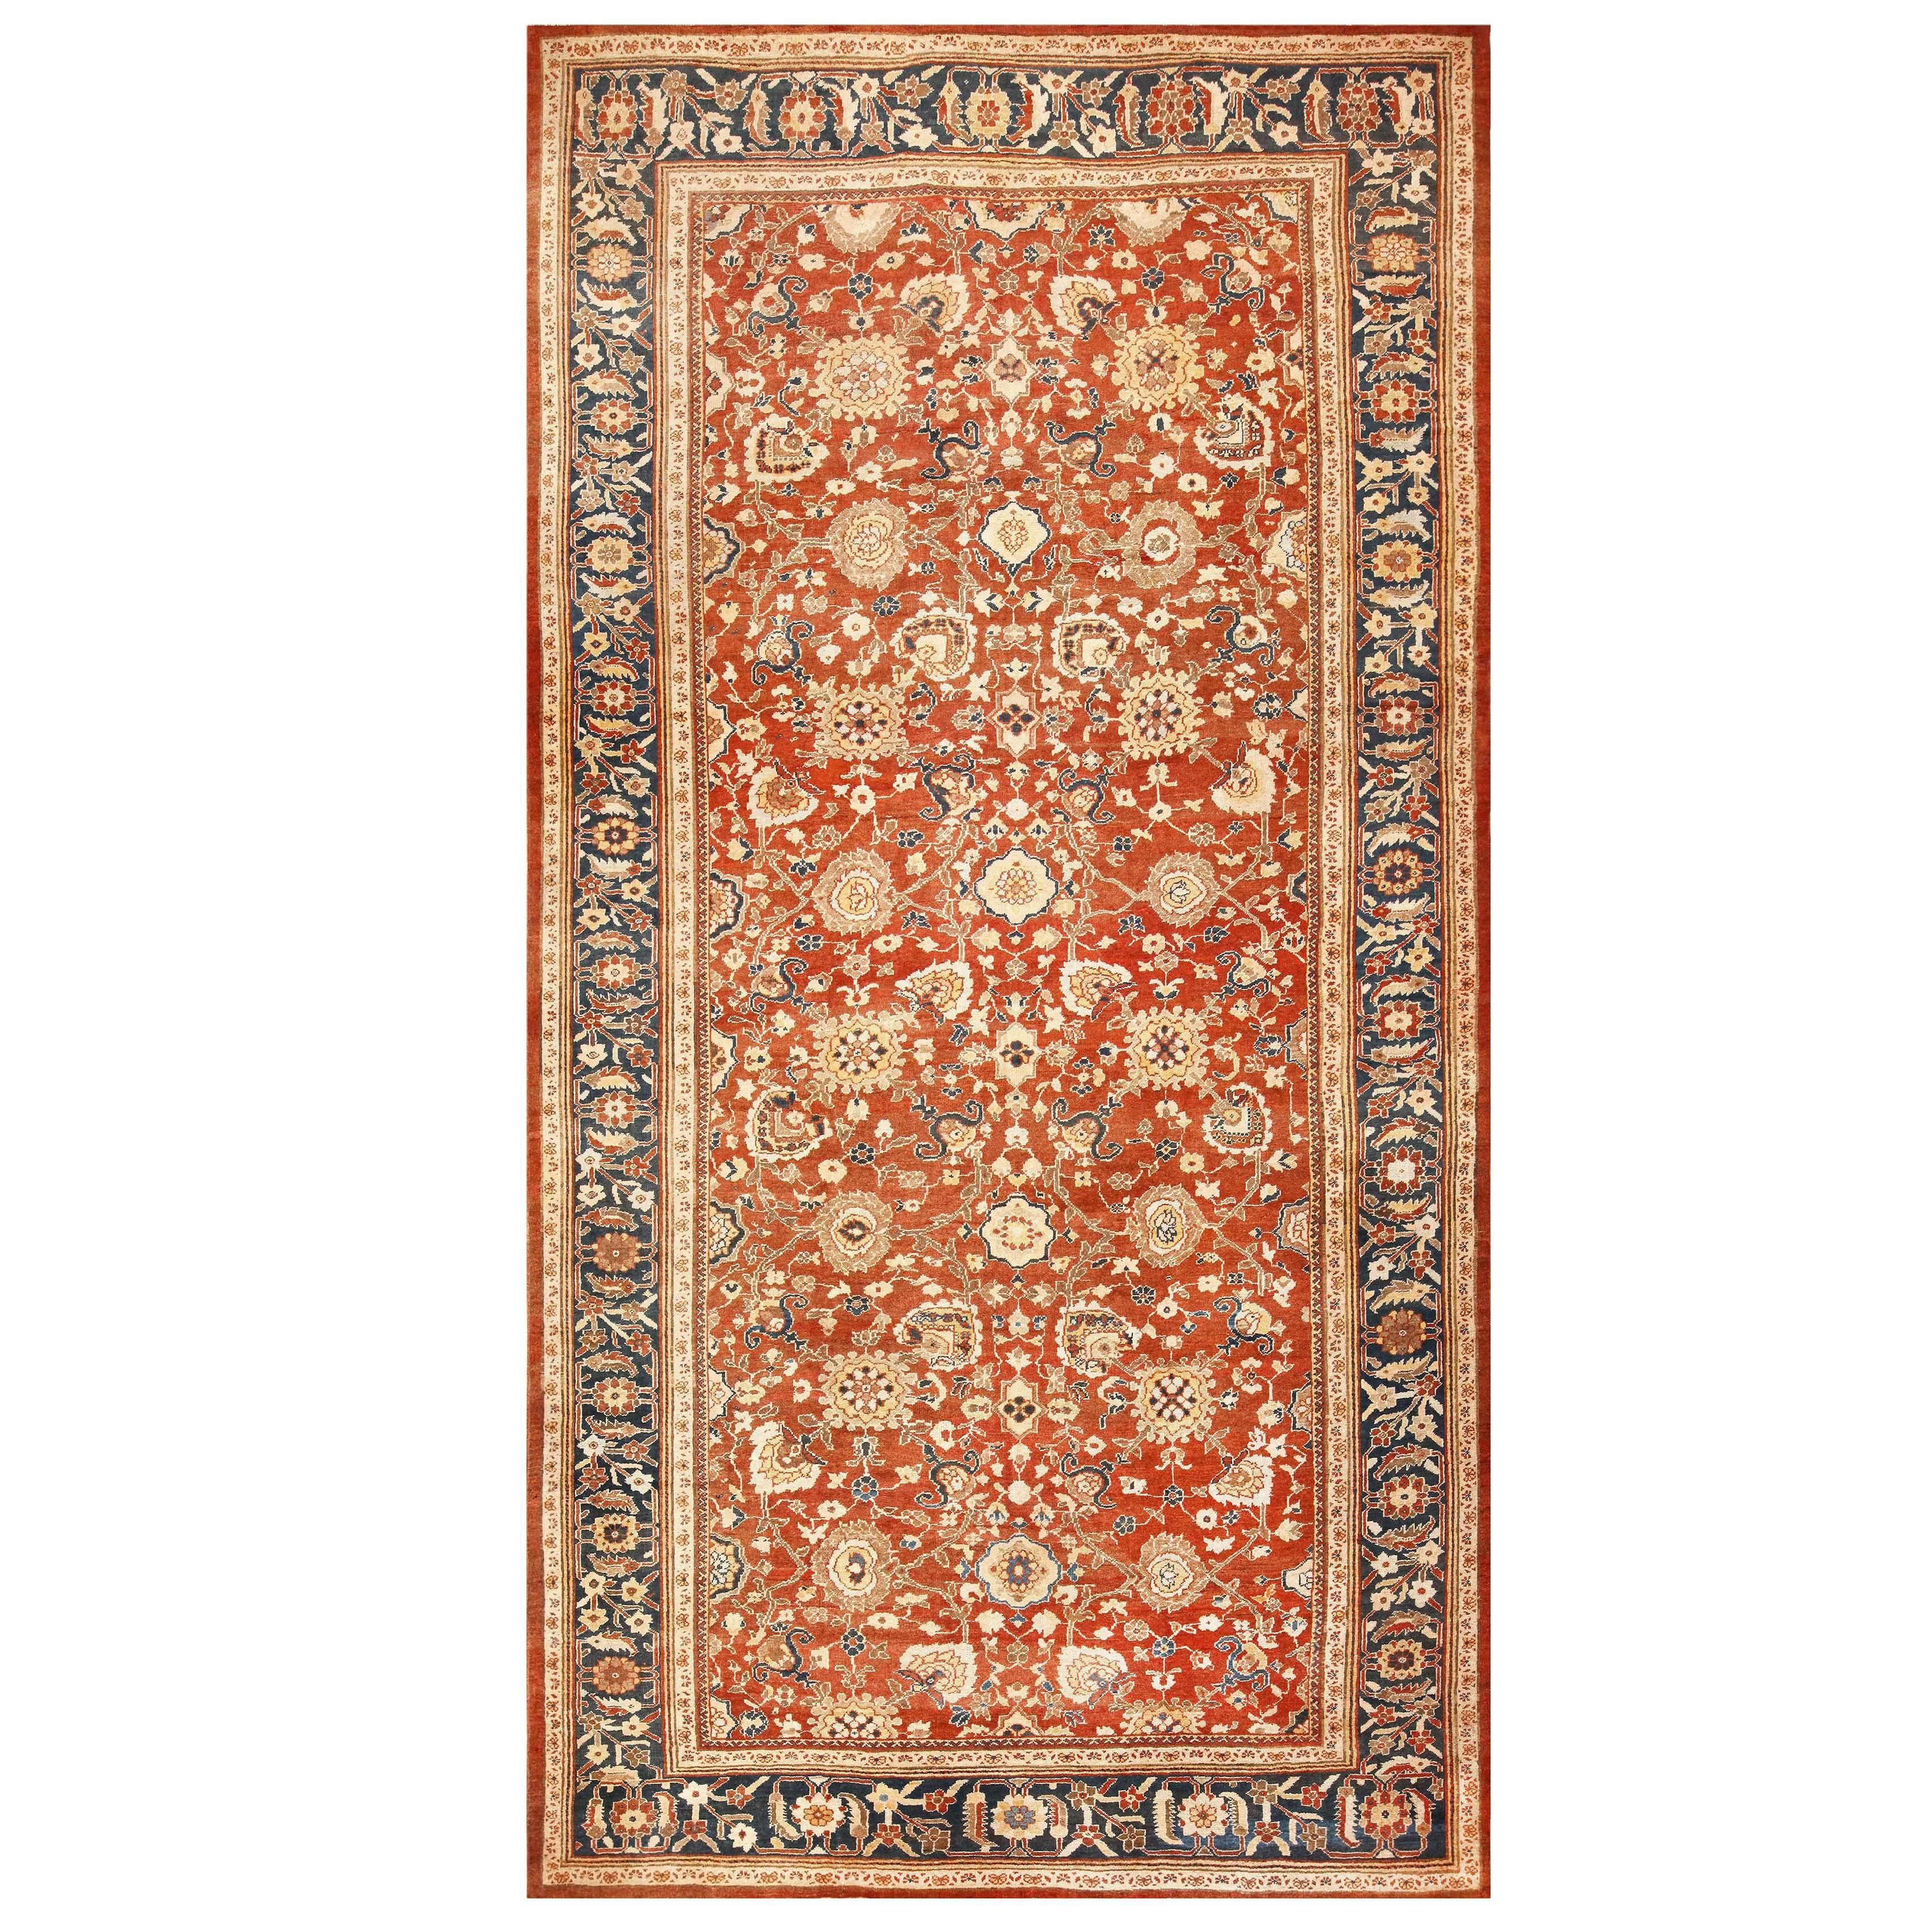 Oversized Antique Persian Sultanabad Rug. Size: 12 ft 3 in x 23 ft 5 in 